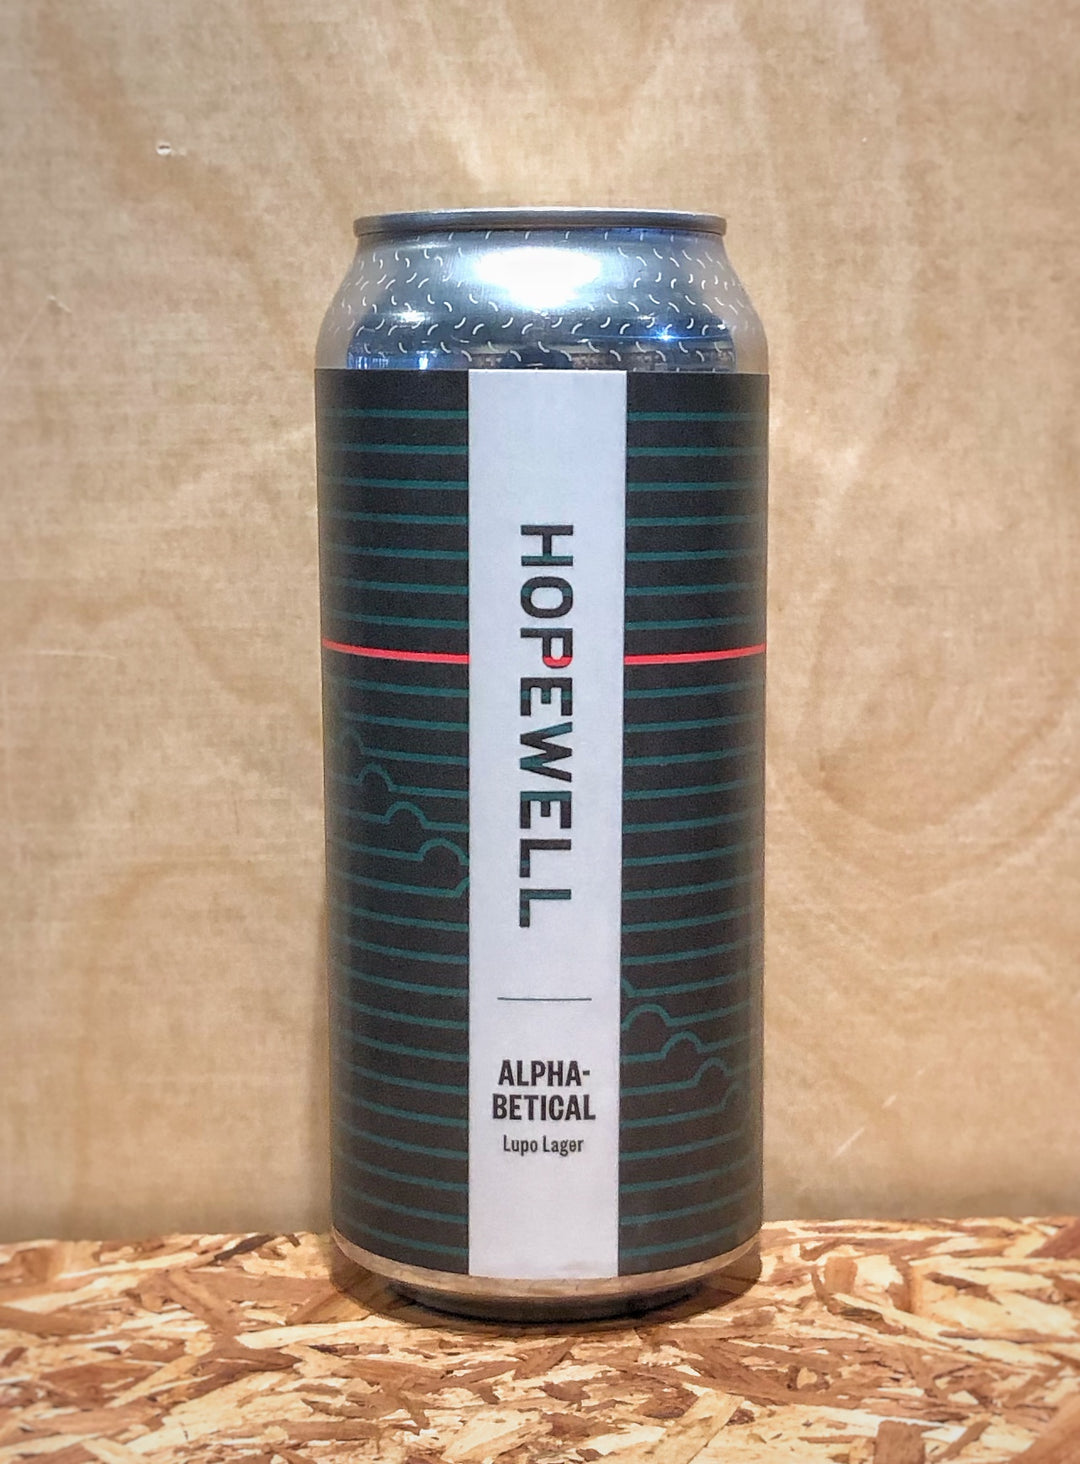 Hopewell x Hop Butcher 'Alphabetical' Lupo Lager (Chicago, IL)